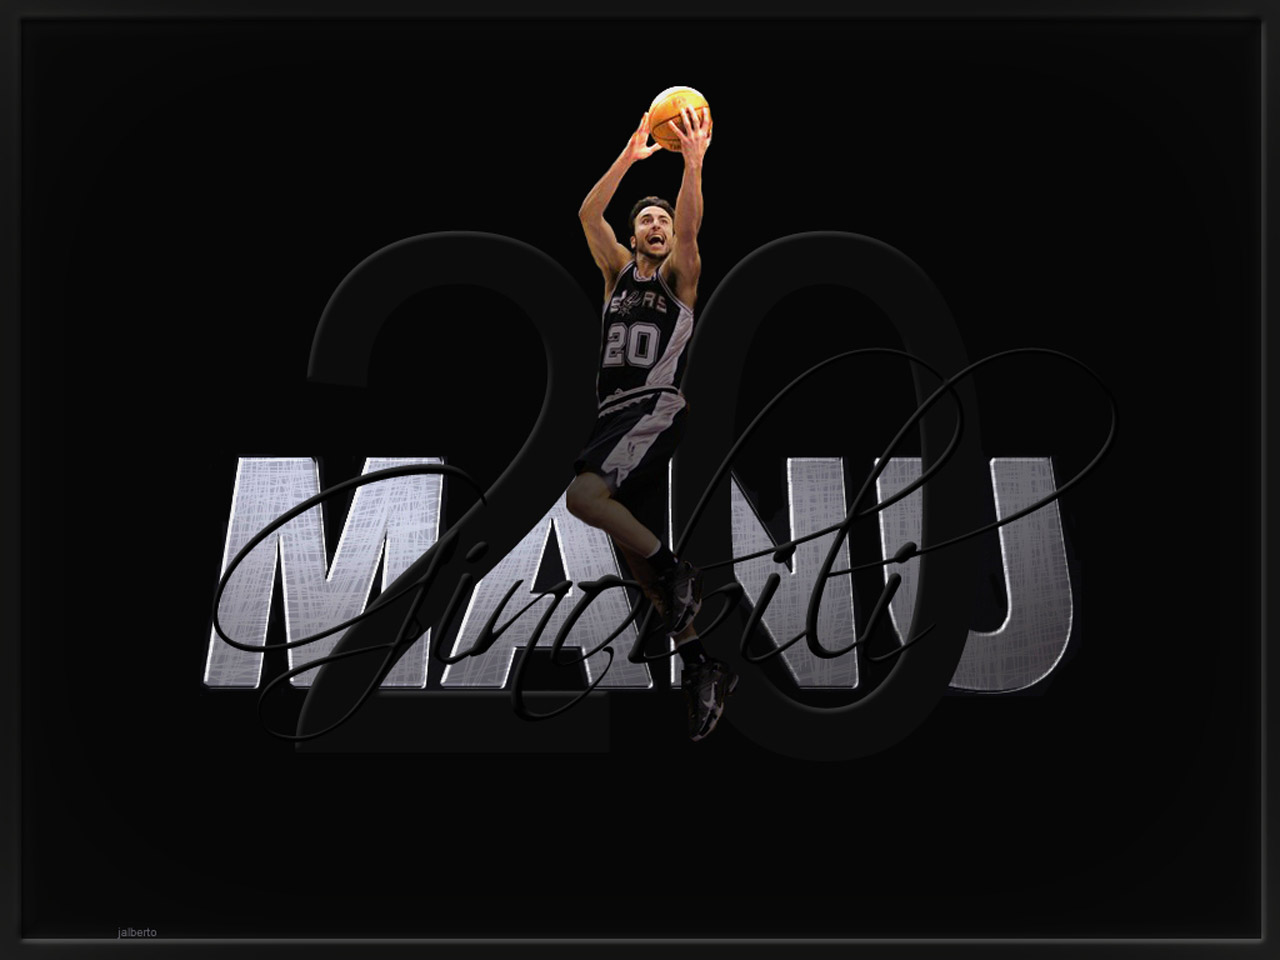  wallpaper of their best player at the moment   Emanuel Ginobili